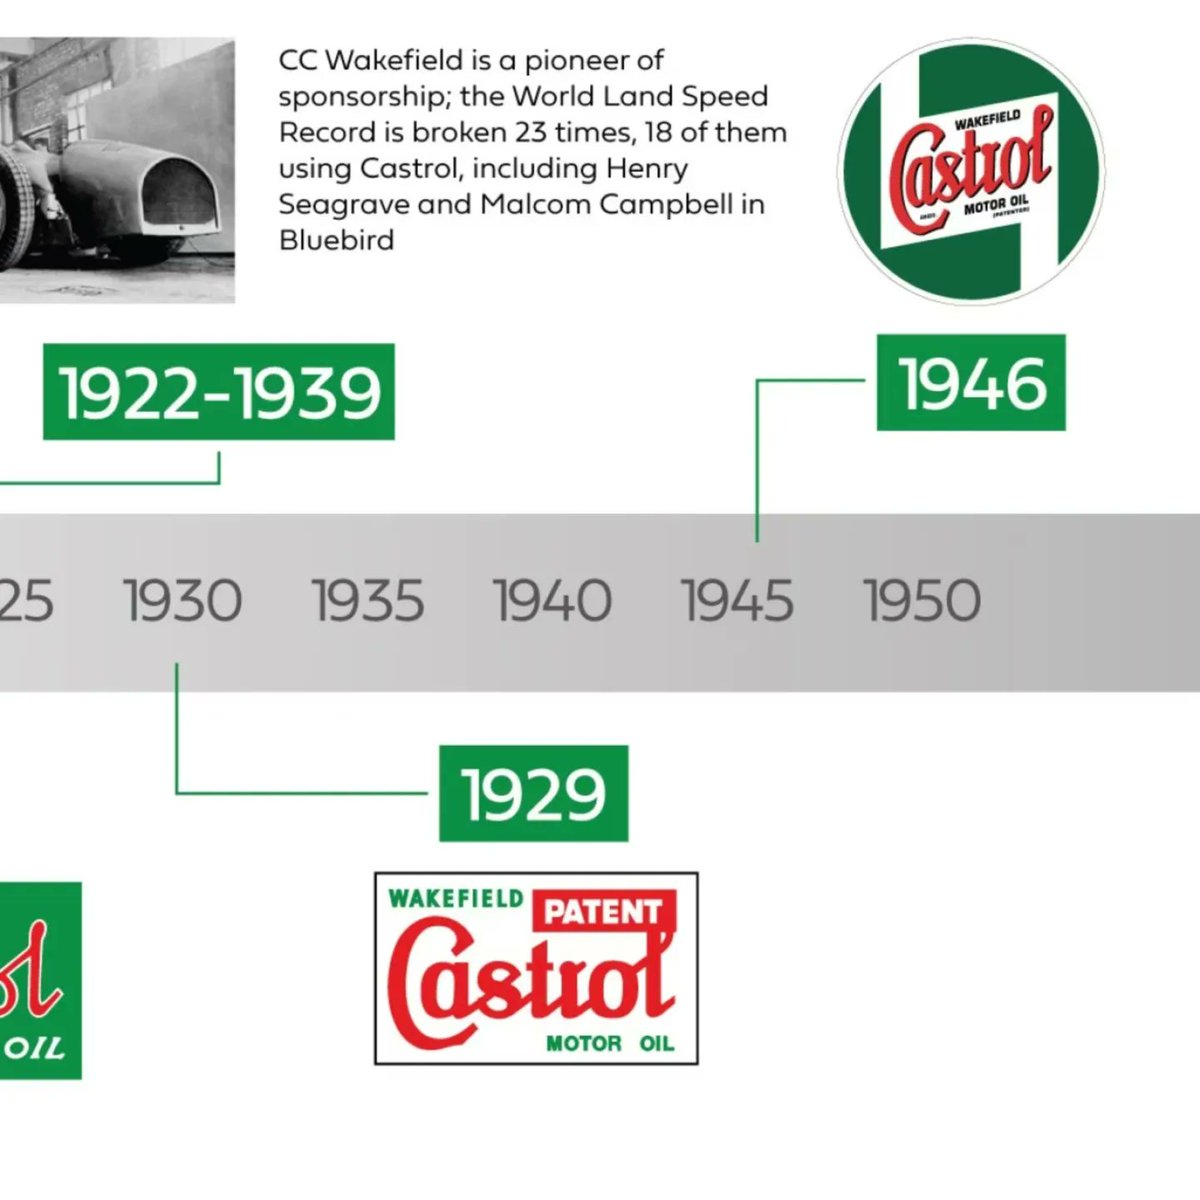 🚗💨 Step back in time with #CastrolHistory! From its founding in 1899 to powering the Golden Arrow land speed records in the 1930s, Castrol has been at the heart of automotive innovation. 🛢️ Celebrating over a century of excellence and engine evolution! 🎉 #castrol125 #Castrol